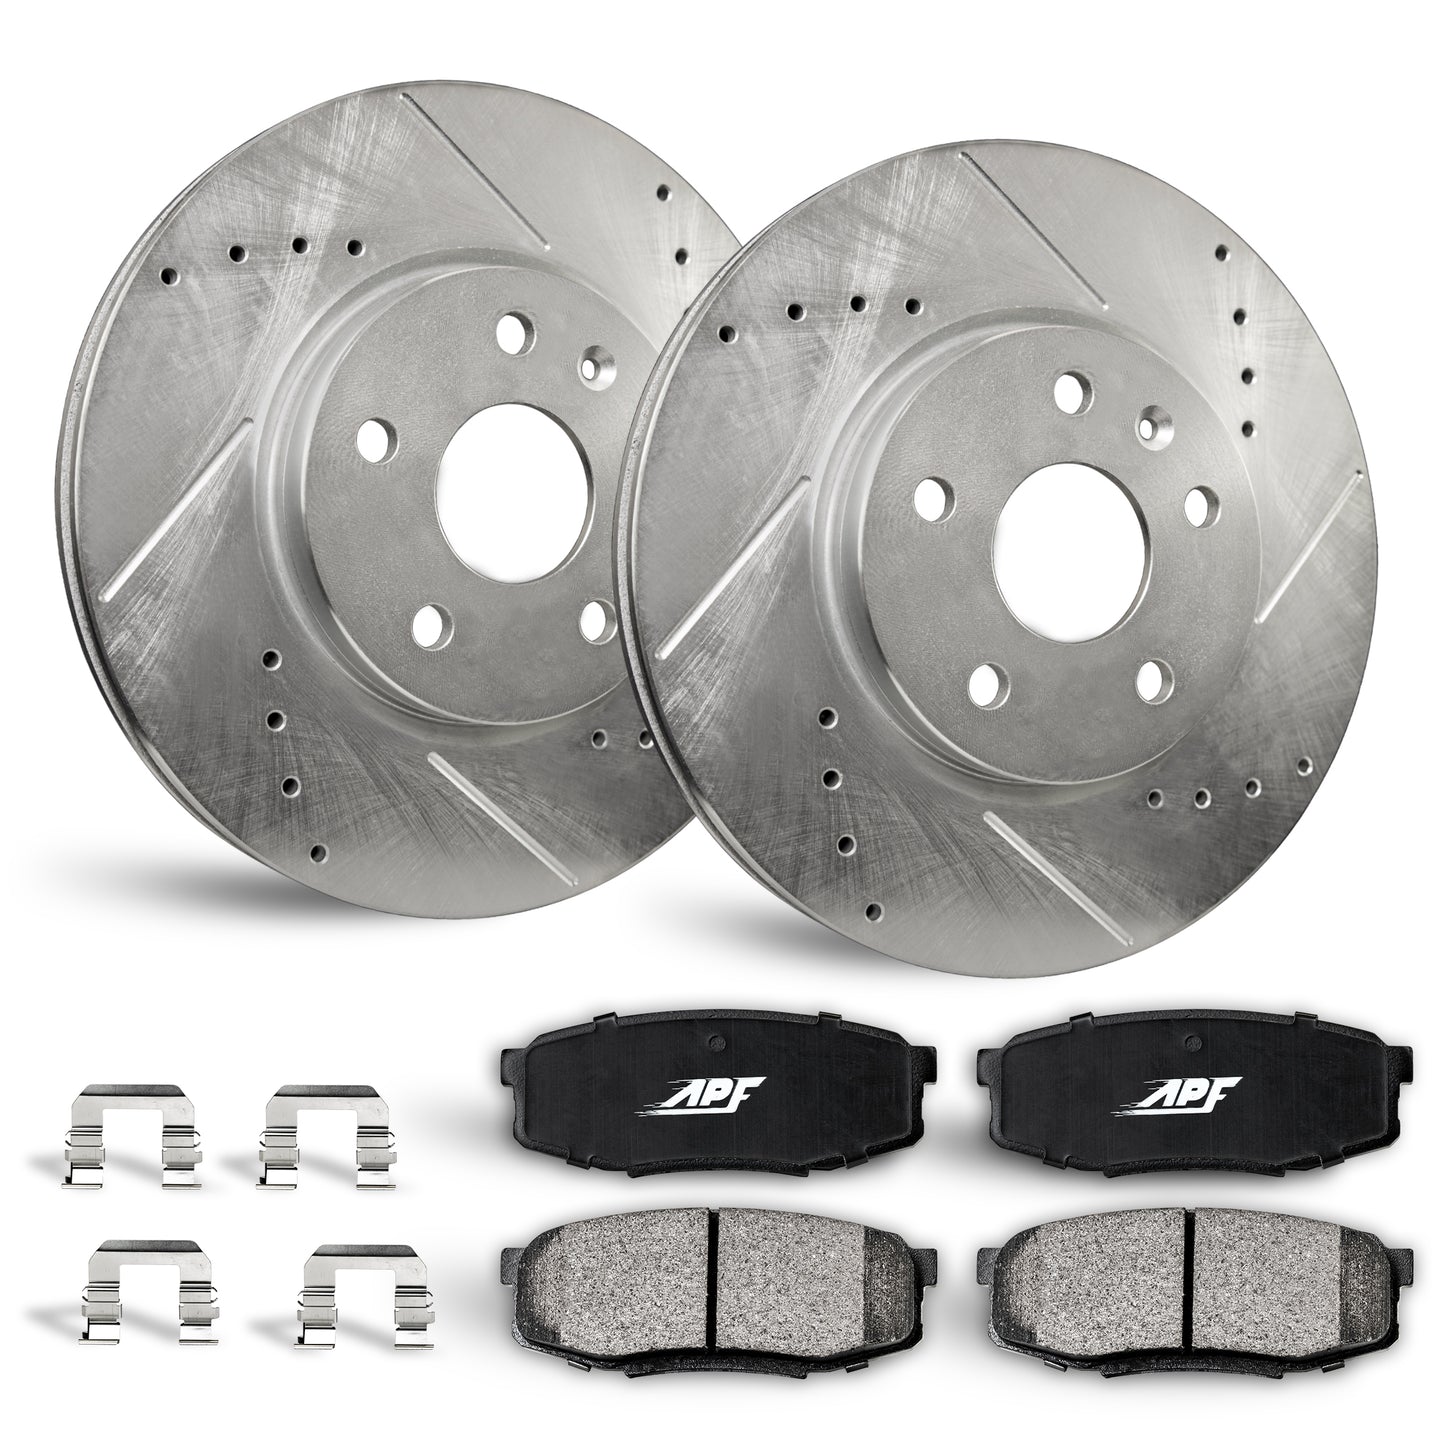 APF Rear Brake Kit compatible with Ford Fusion 2013-2019 | Zinc Drilled Slotted Rotors with Ceramic Carbon Fiber Brake Pads